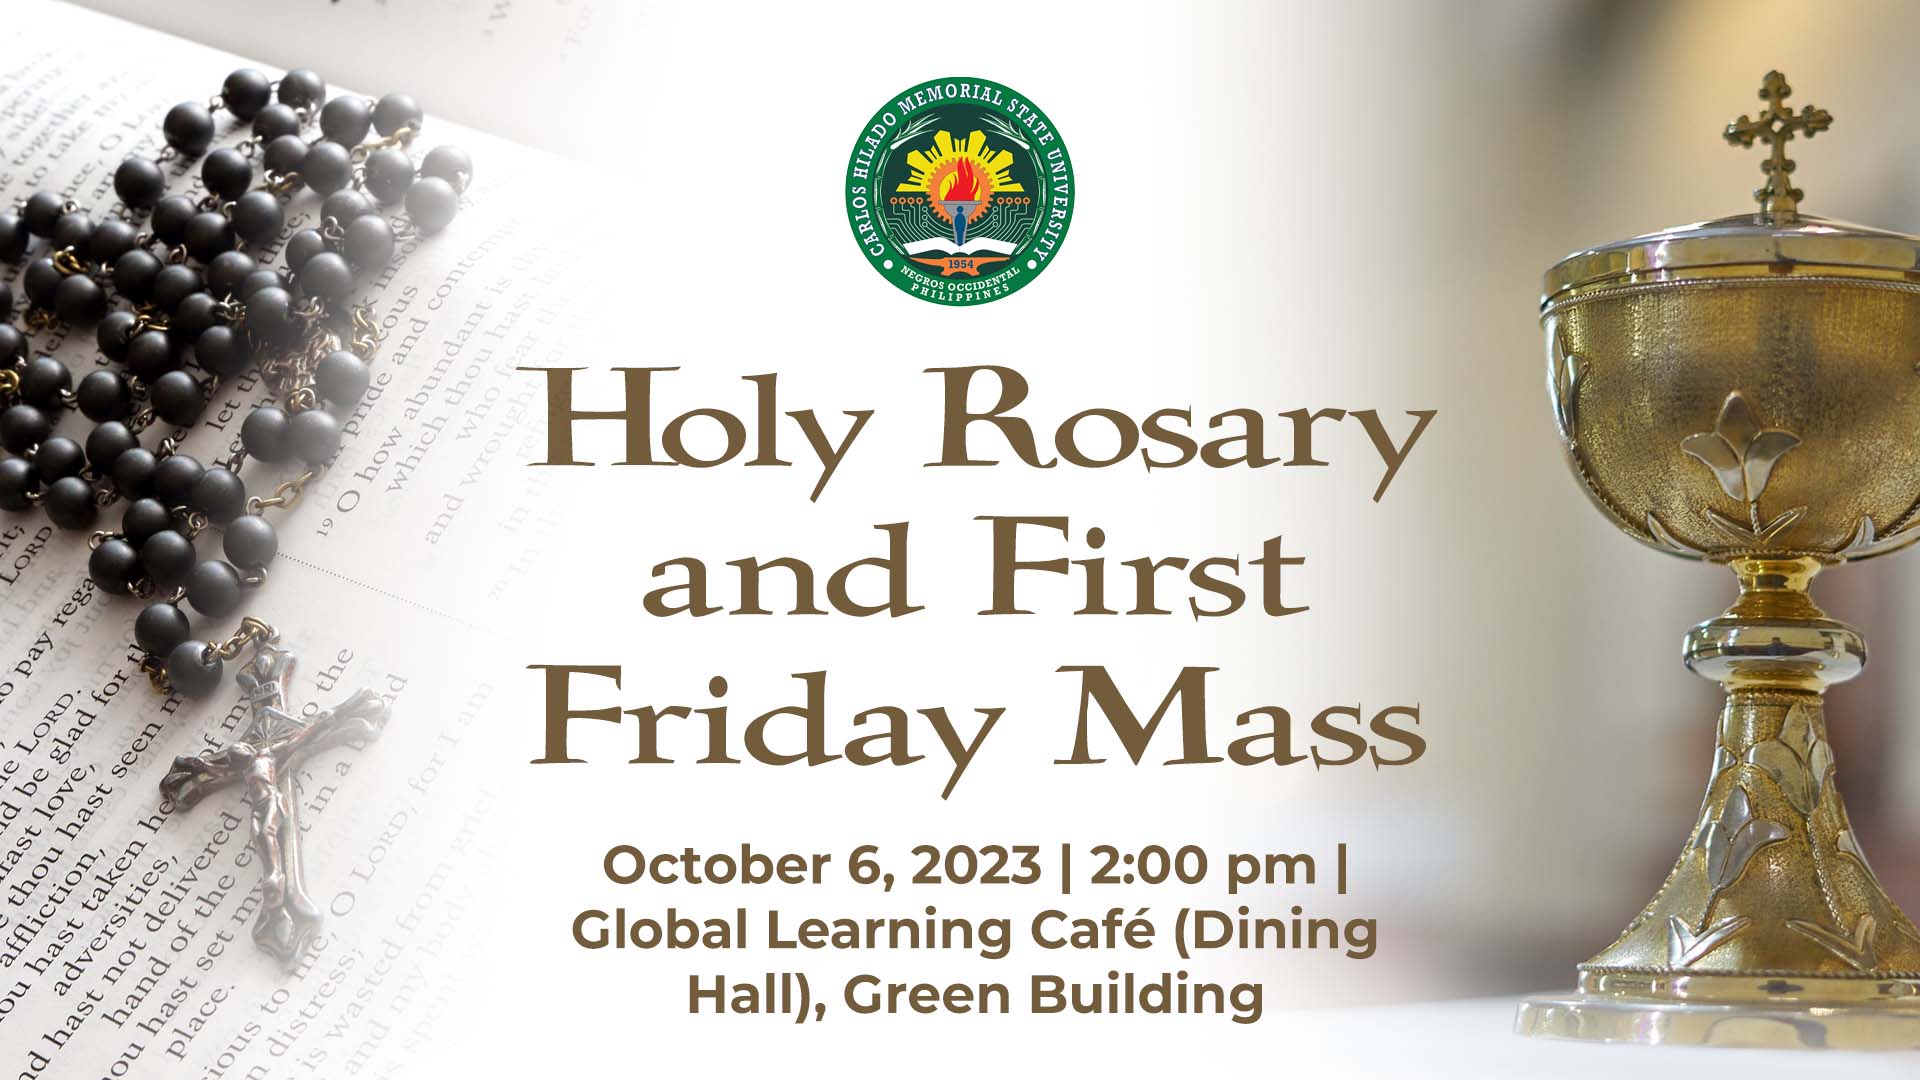 Holy Rosary And First Friday Mass Carlos Hilado Memorial State University 5451